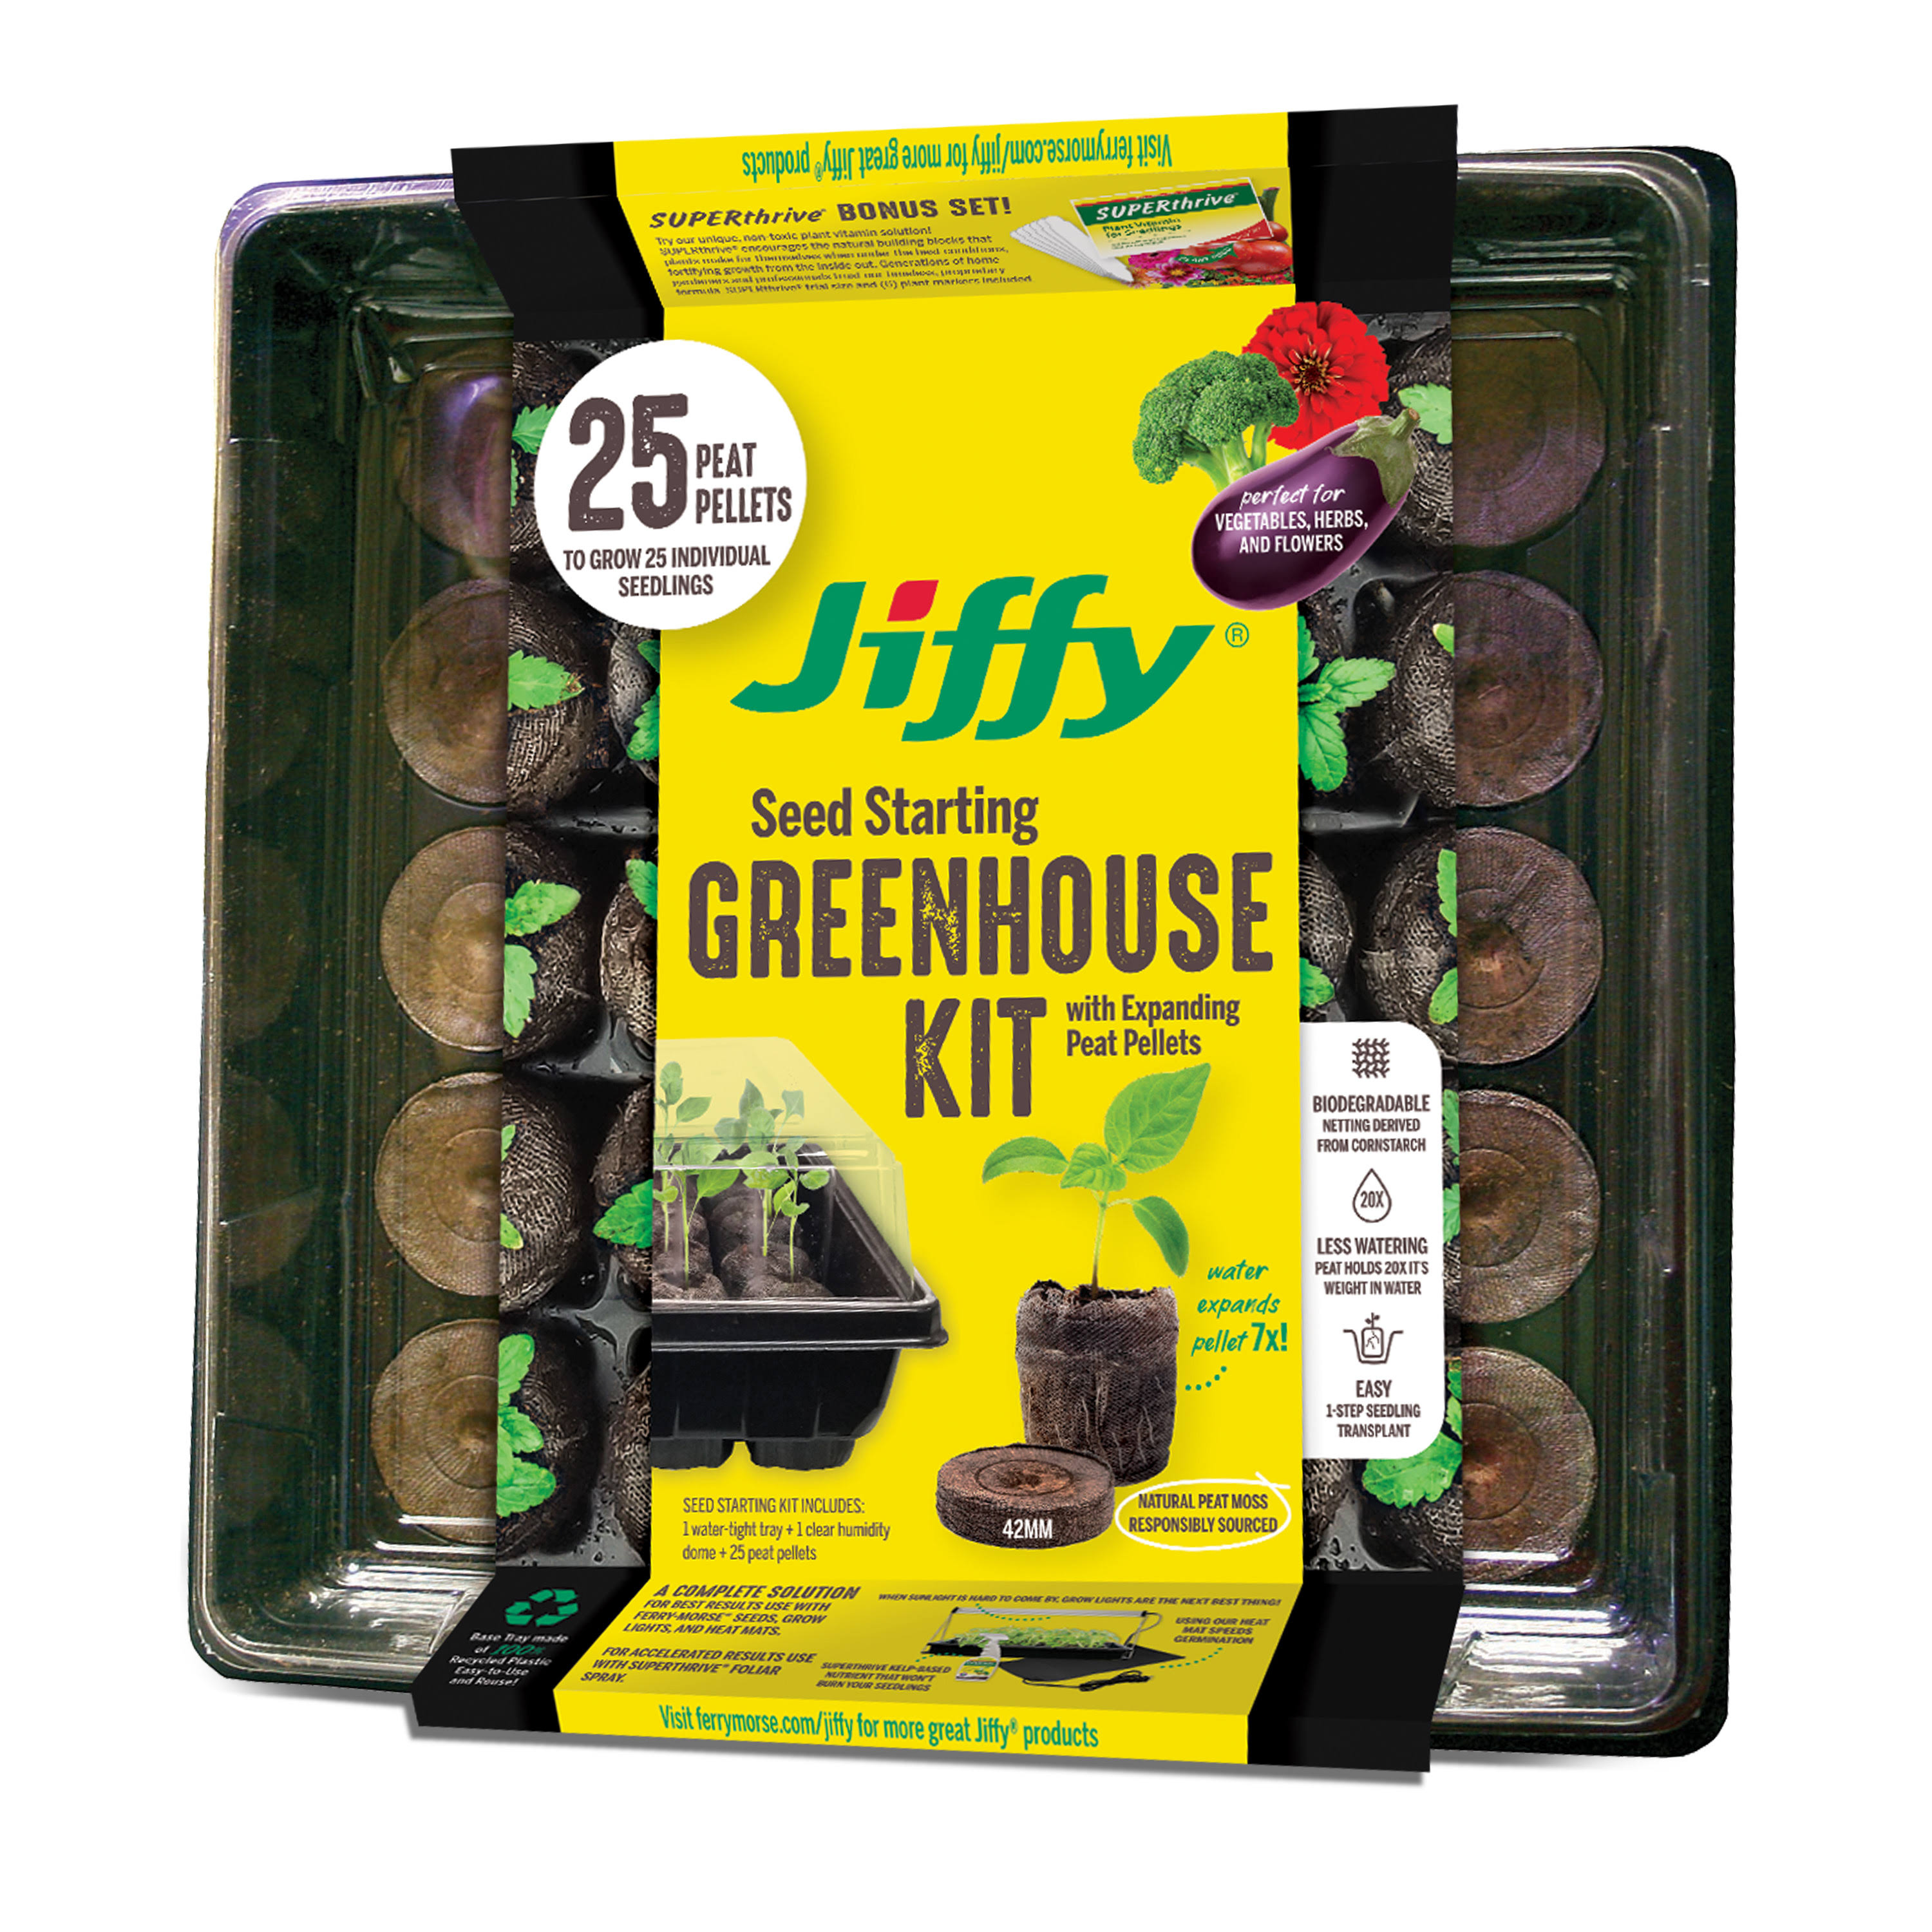 Jiffy Professional 25-Cell Seed Starting Greenhouse with Superthrive